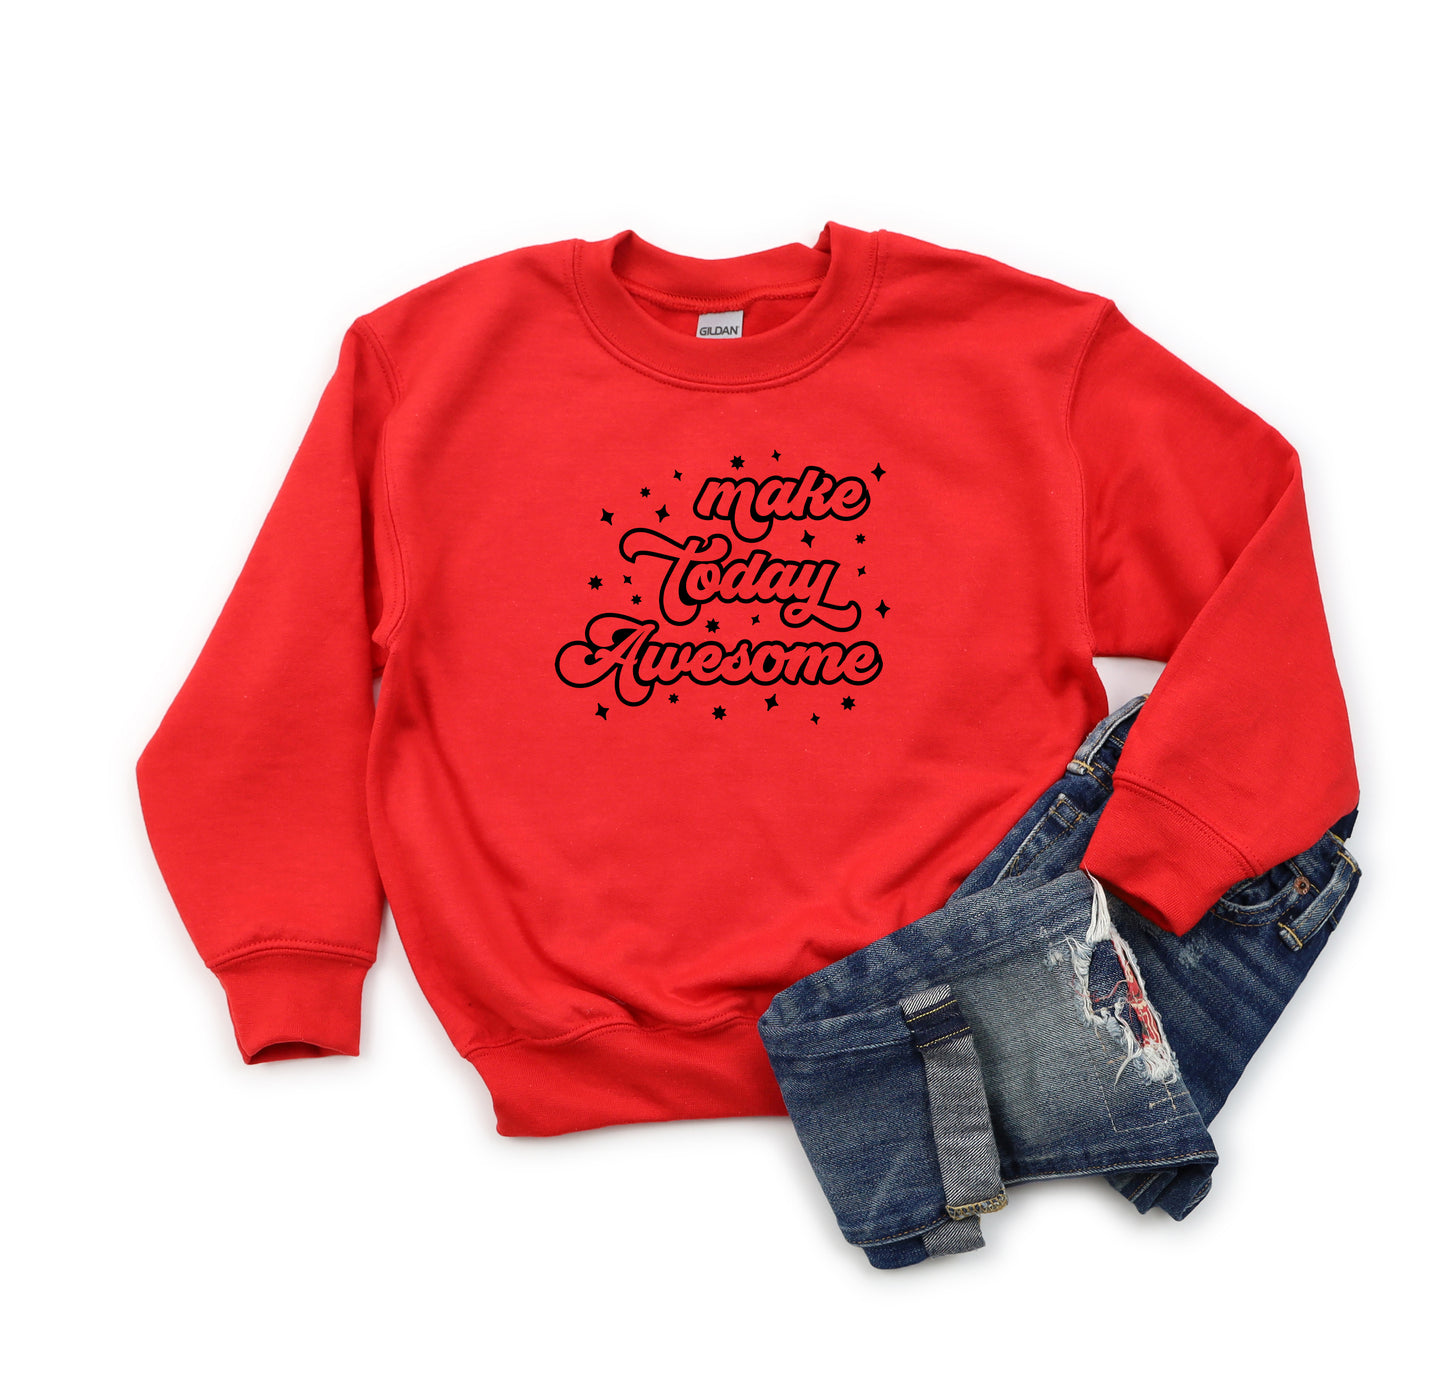 Make Today Awesome | Youth Sweatshirt